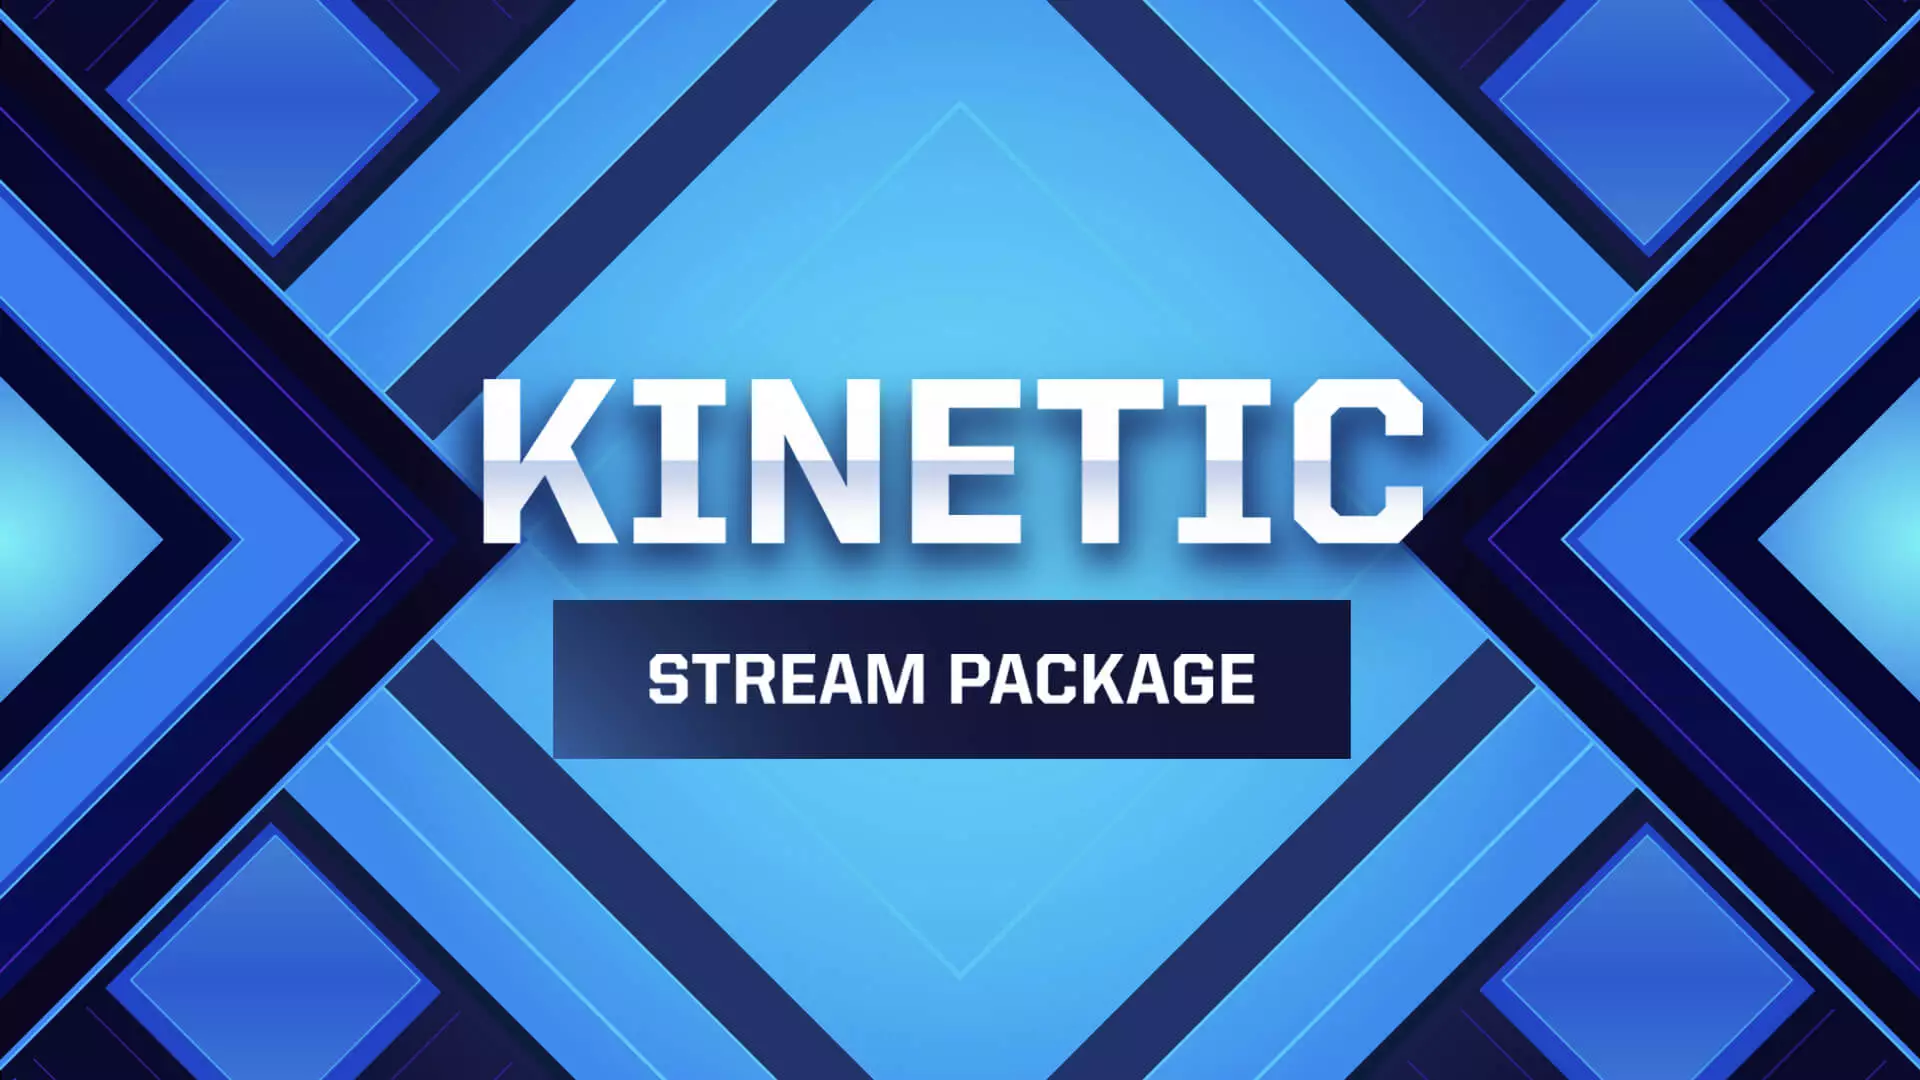 Kinetic Stream Package for Twitch, Youtube and Facebook Gaming